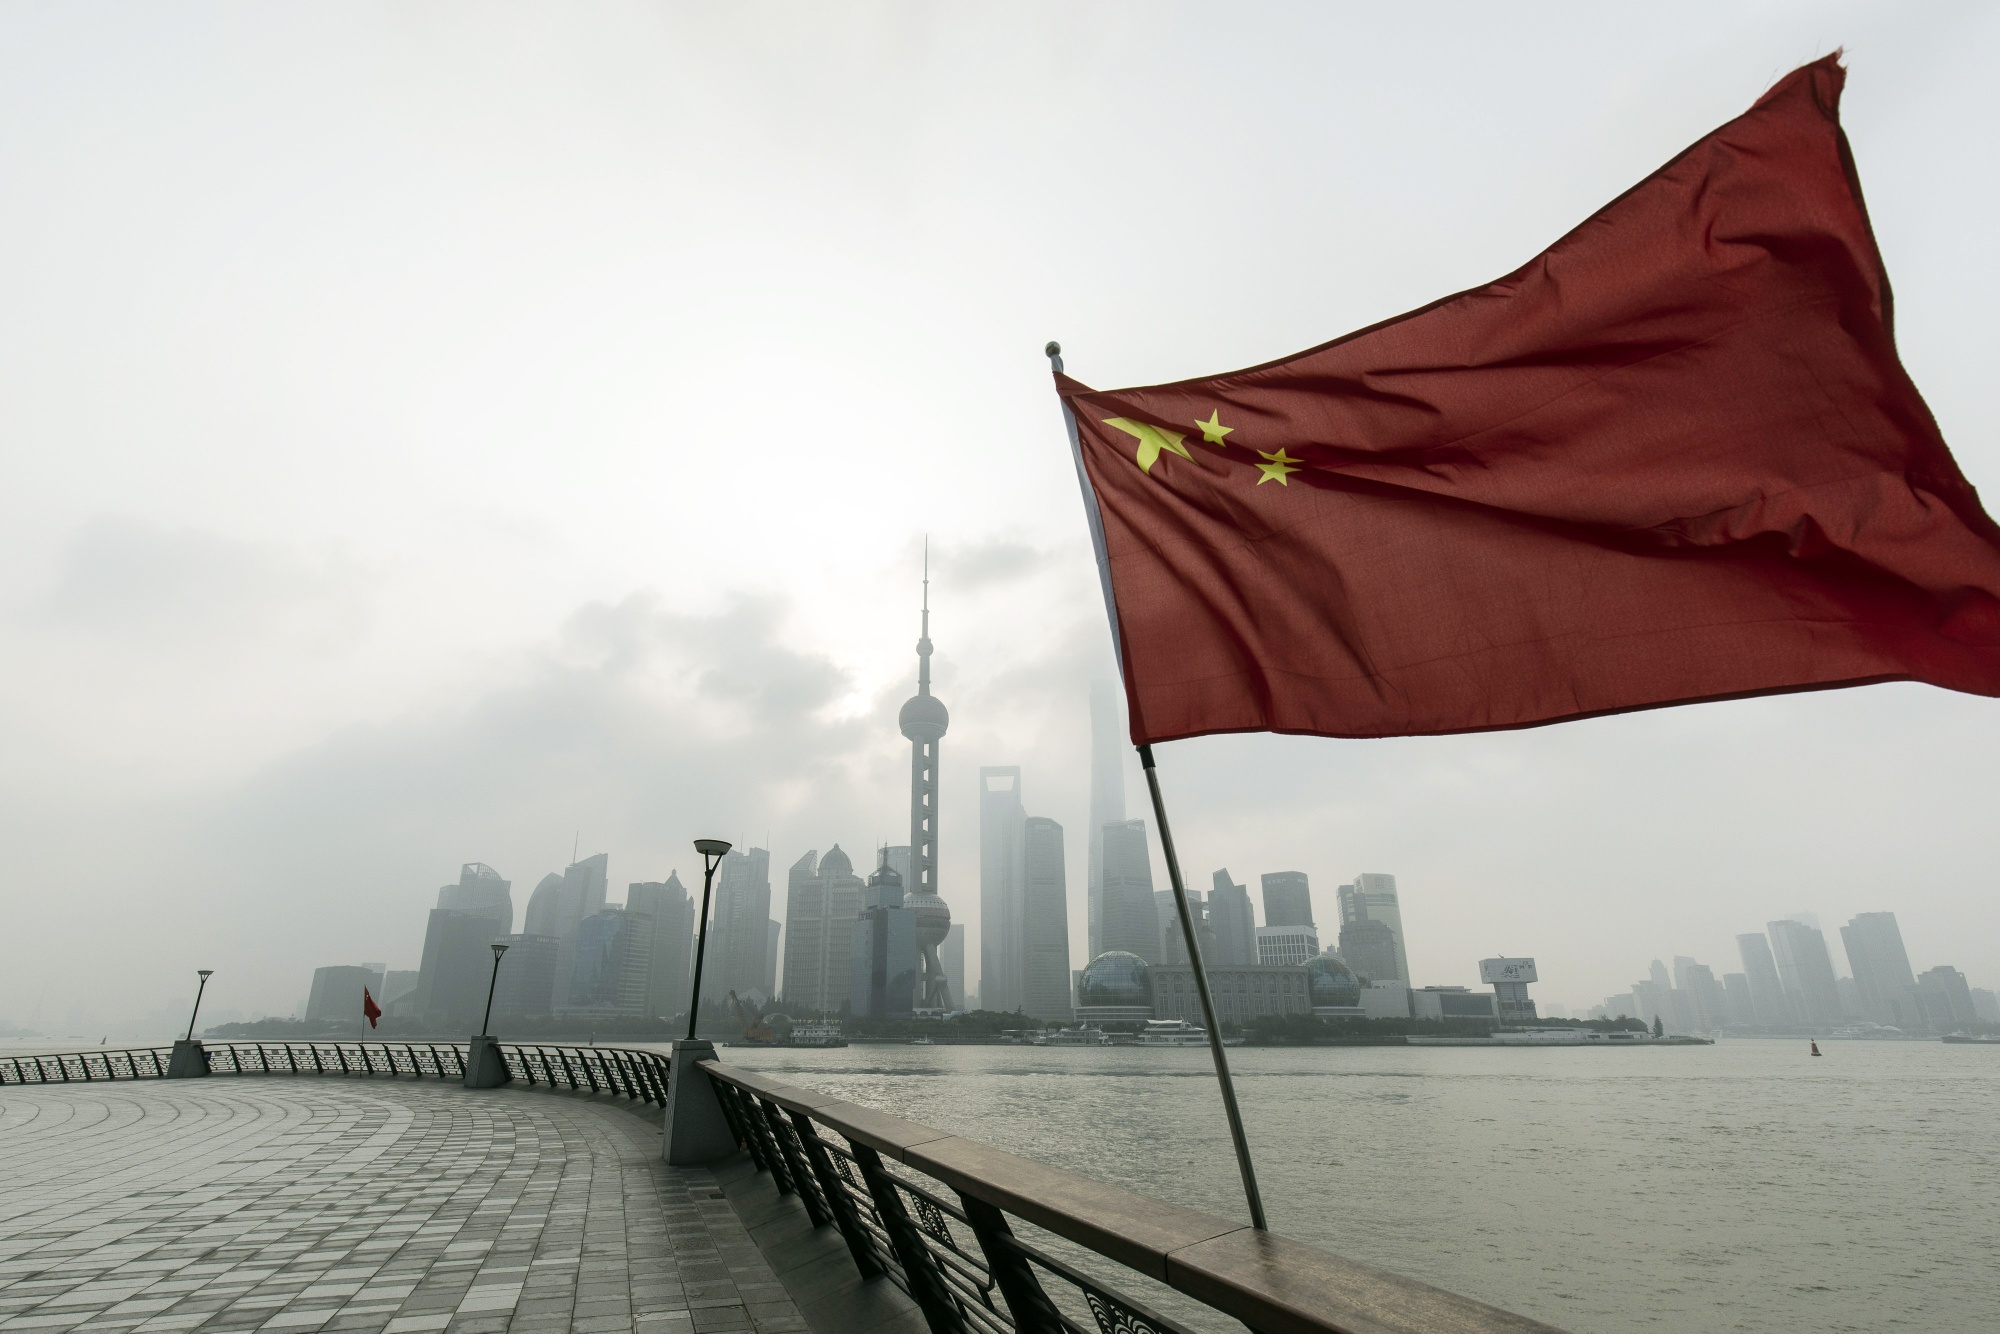 A Chinese flag in front of buildings in Pudong's Lujiazui Financial District in Shanghai.